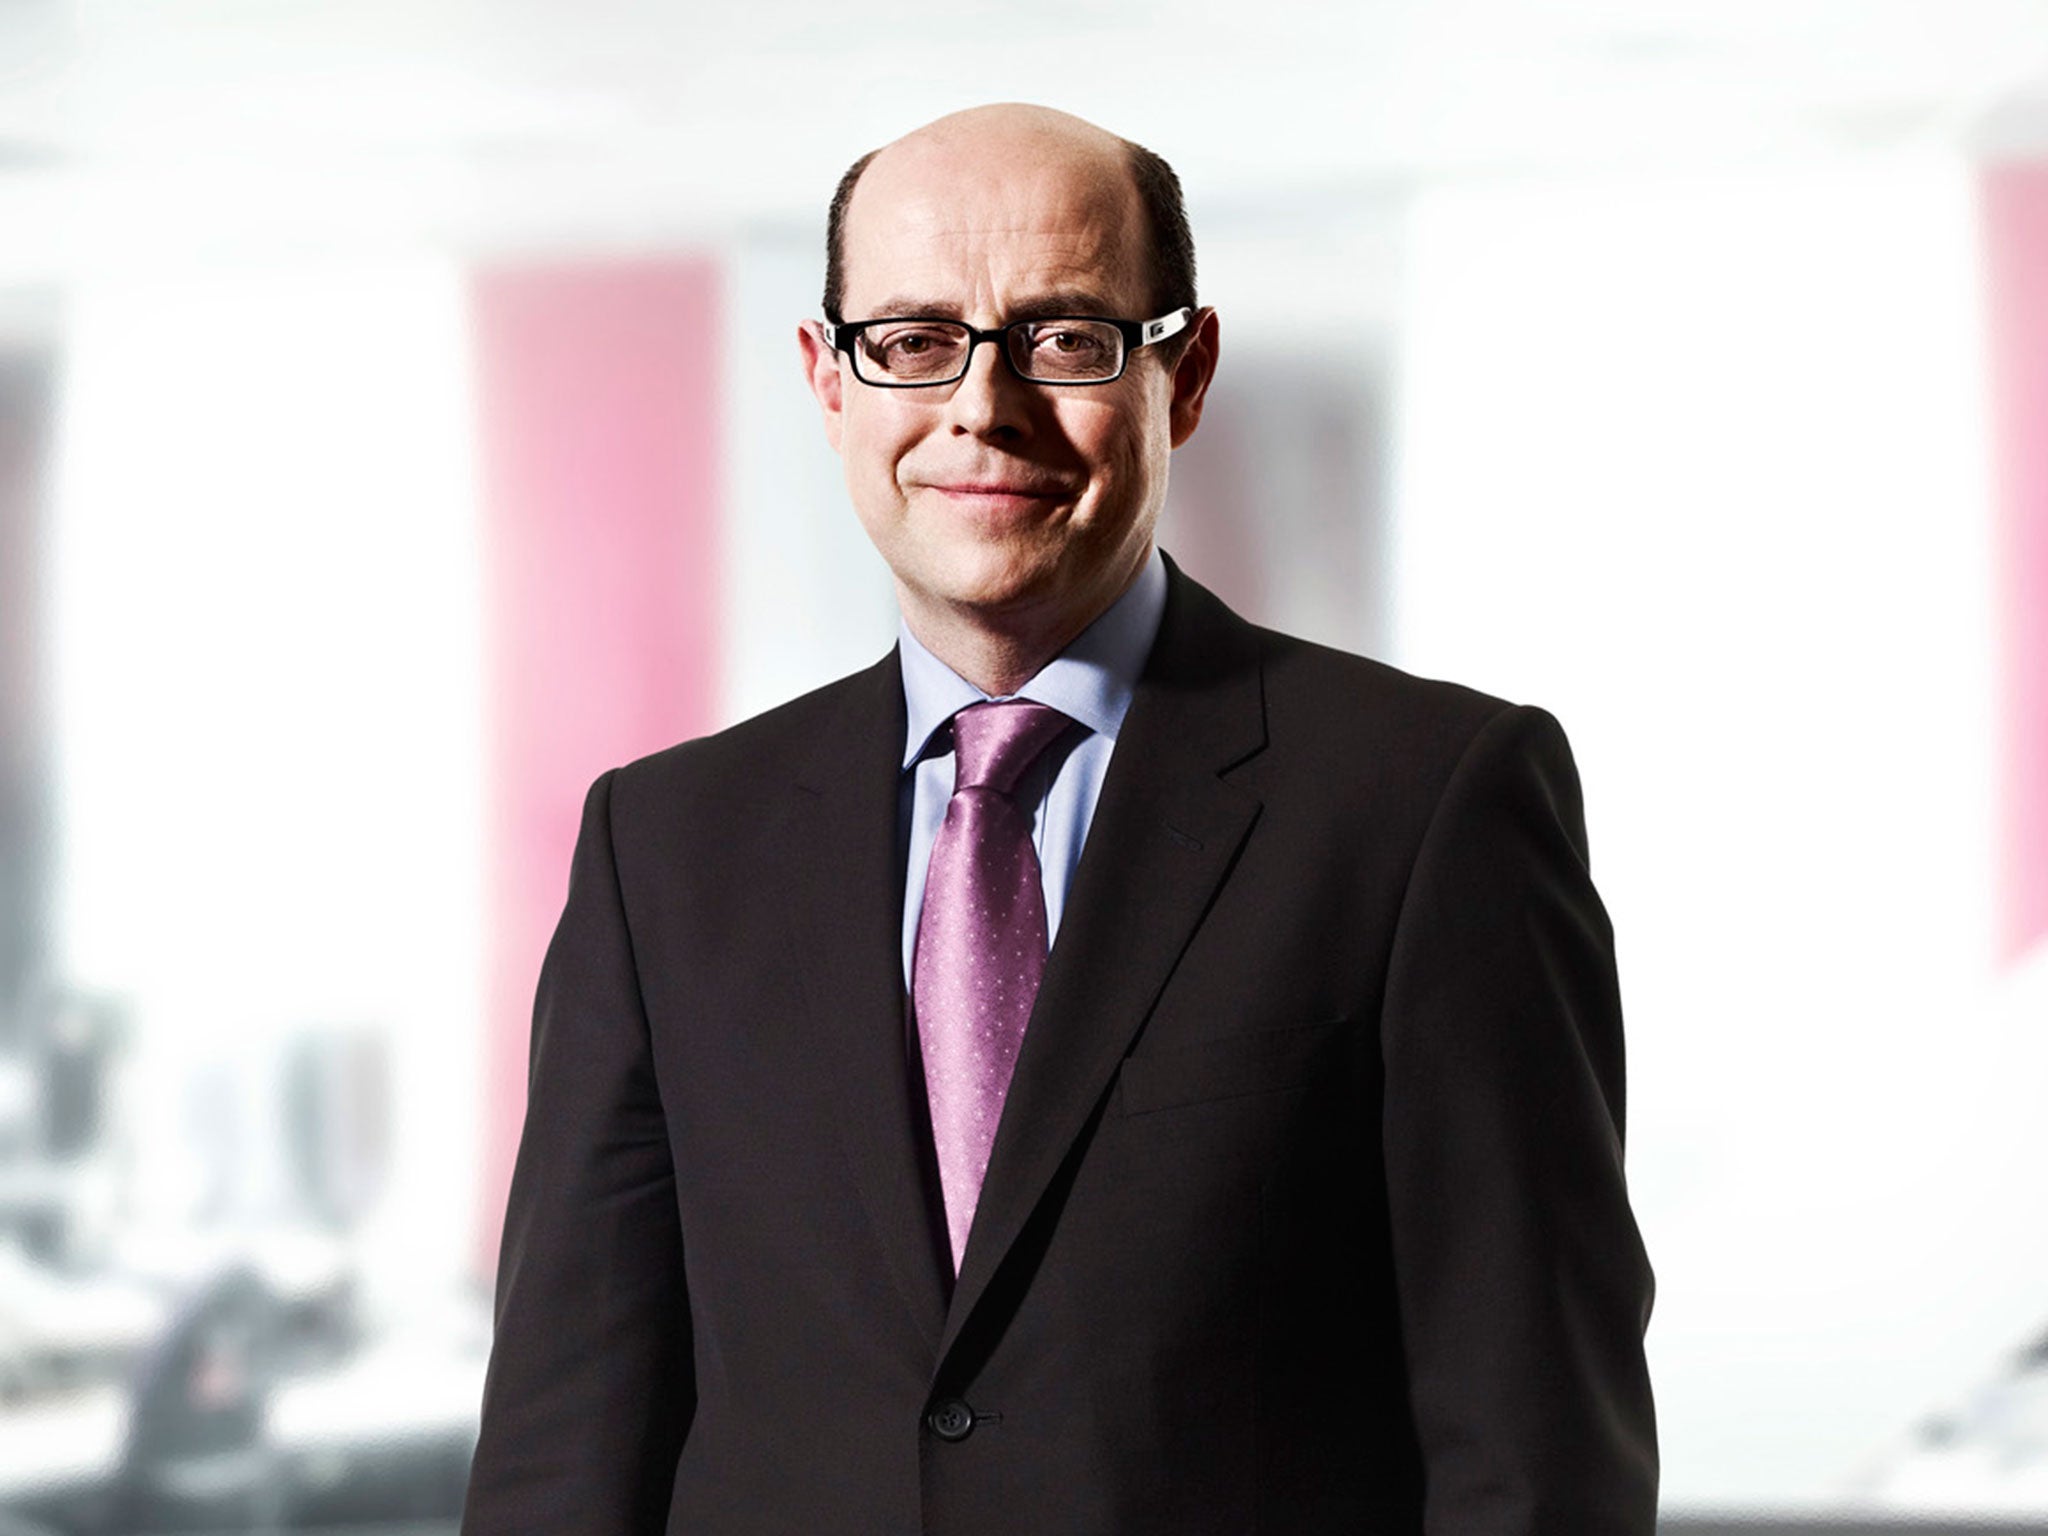 Nick Robinson, the BBC’s political editor, has revealed his lung cancer is worse than he had thought and that he is now undergoing chemotherapy